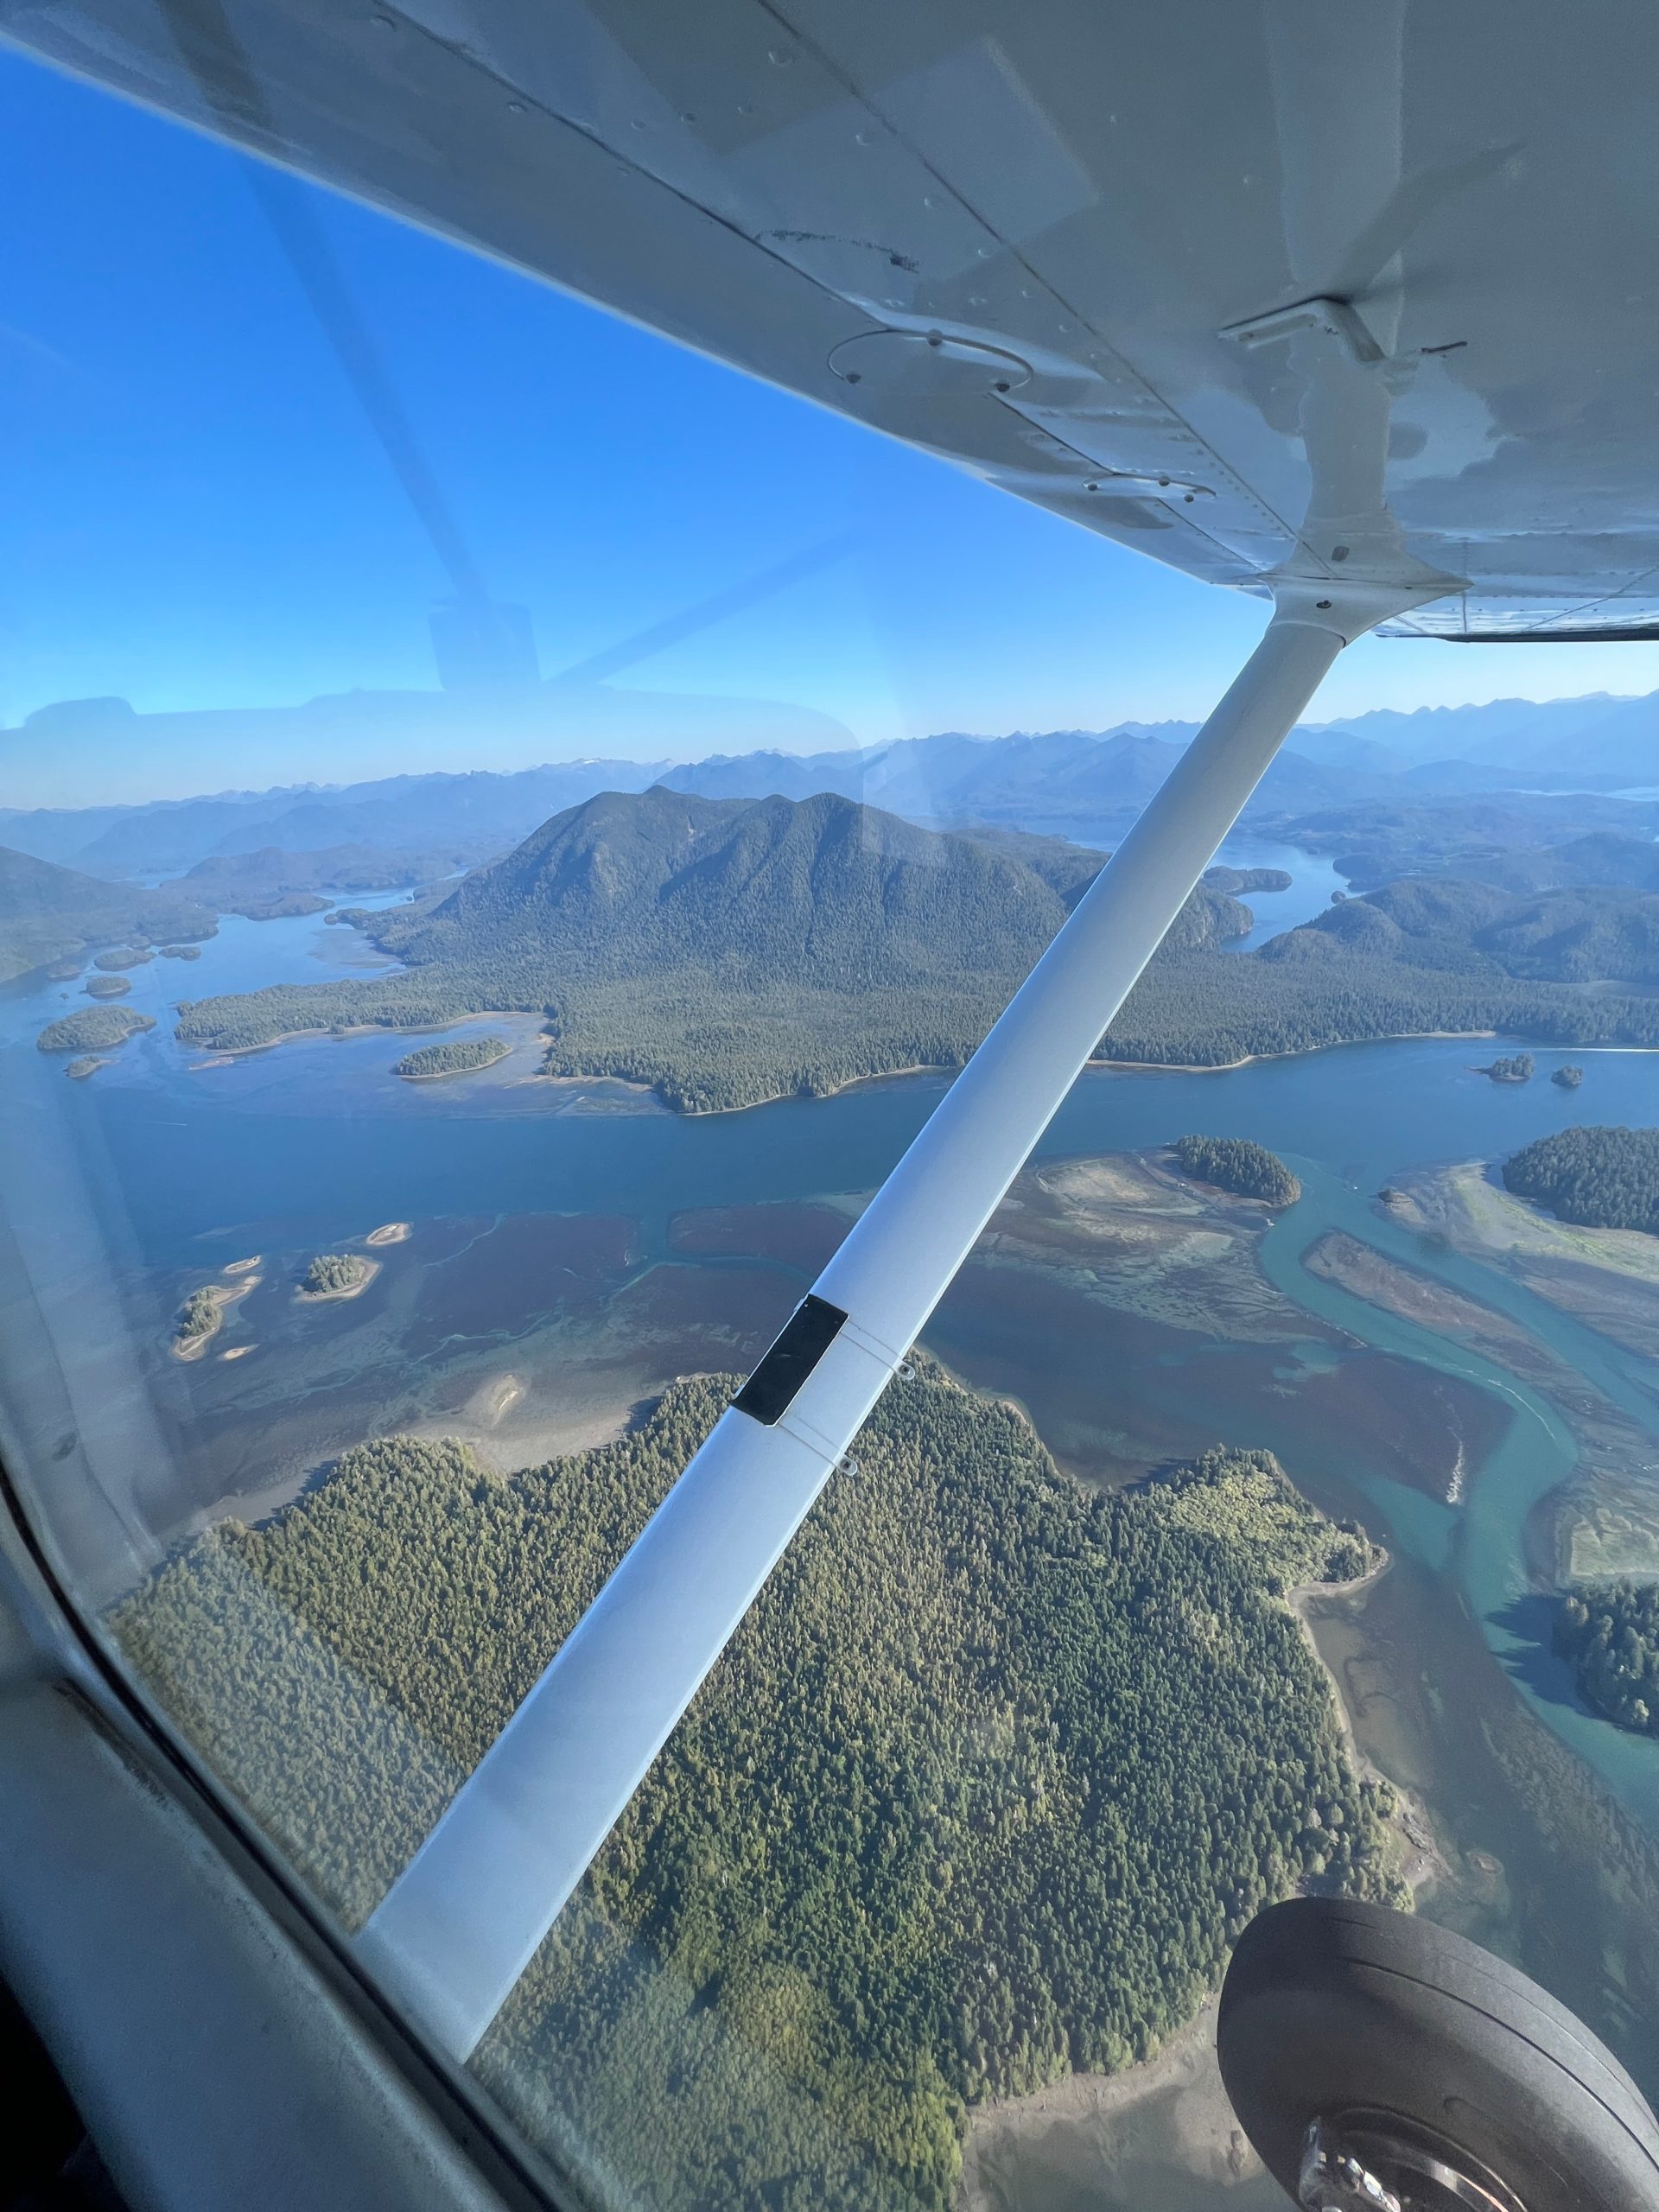 Tofino and the surrounding islands as seen from a plane